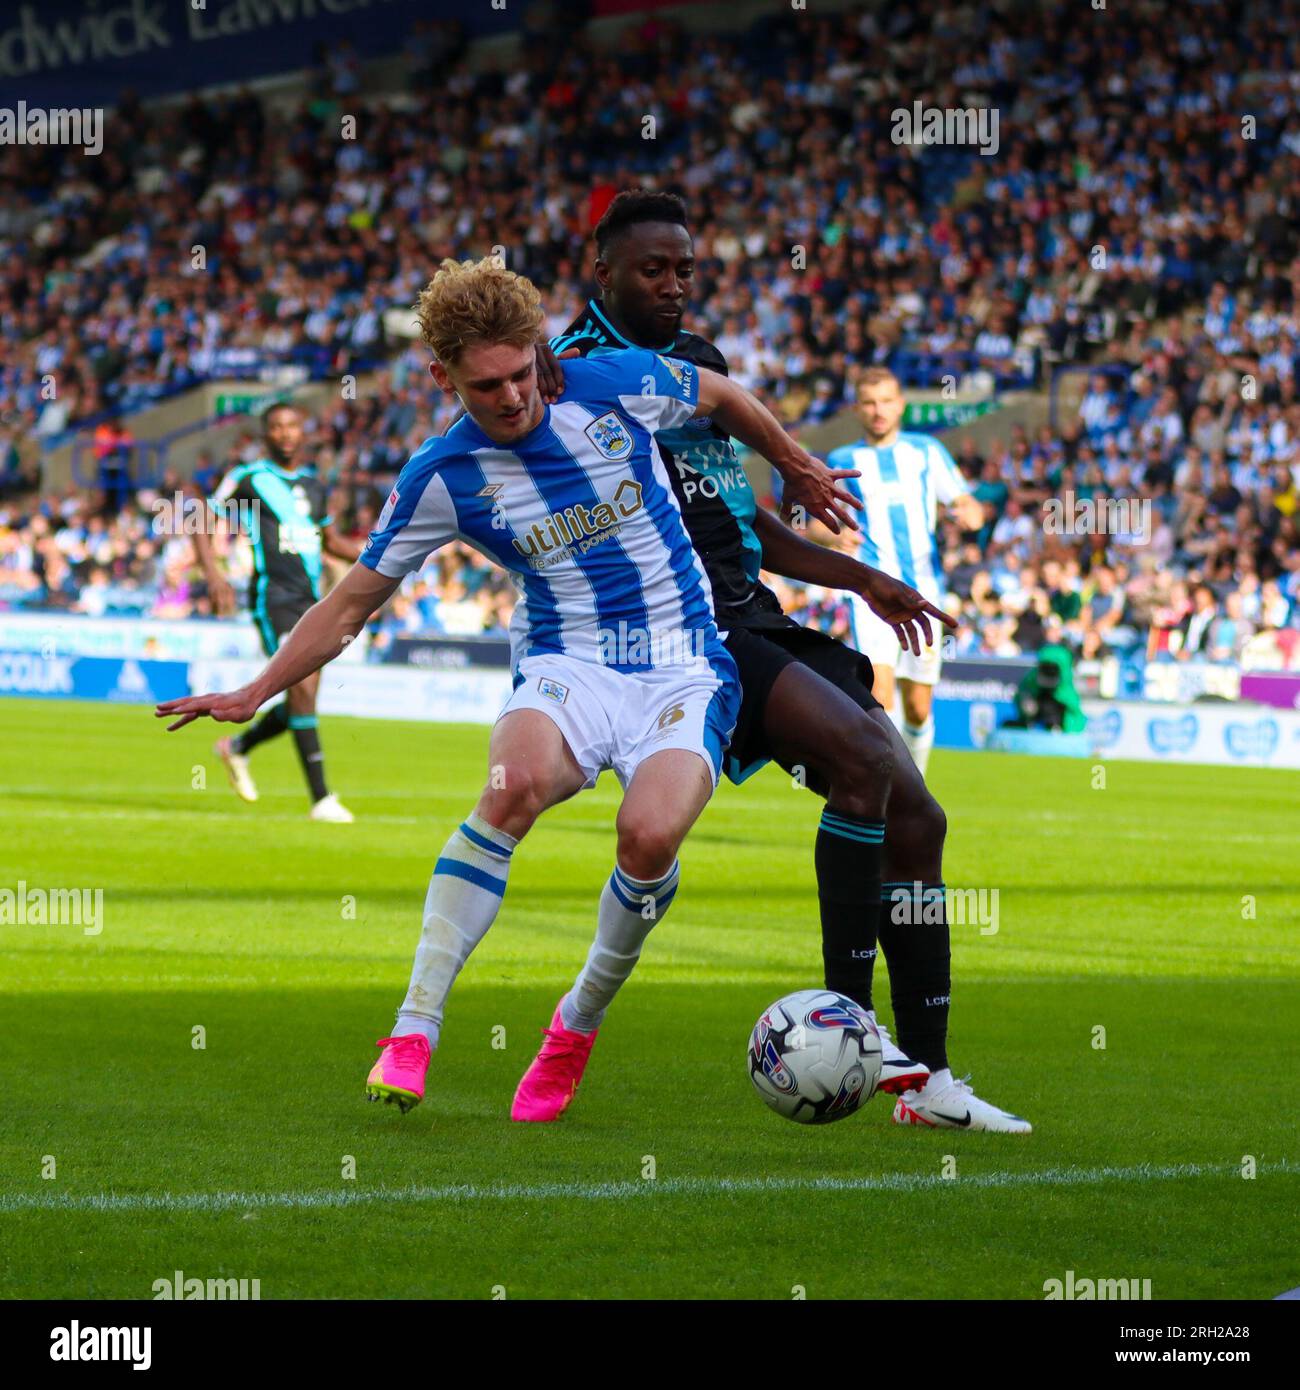 John Smith's Stadium, Huddersfield, England - 12th August 2023 Jack Rudoni (8) of Huddersfield Town and Wilfred Ndidi (25) of Leicester City fight for possession of the ball - during the game Huddersfield Town v Leicester City, Sky Bet Championship,  2023/24, John Smith's Stadium, Huddersfield, England - 12th August 2023 Credit: Mathew Marsden/WhiteRosePhotos/Alamy Live News Stock Photo